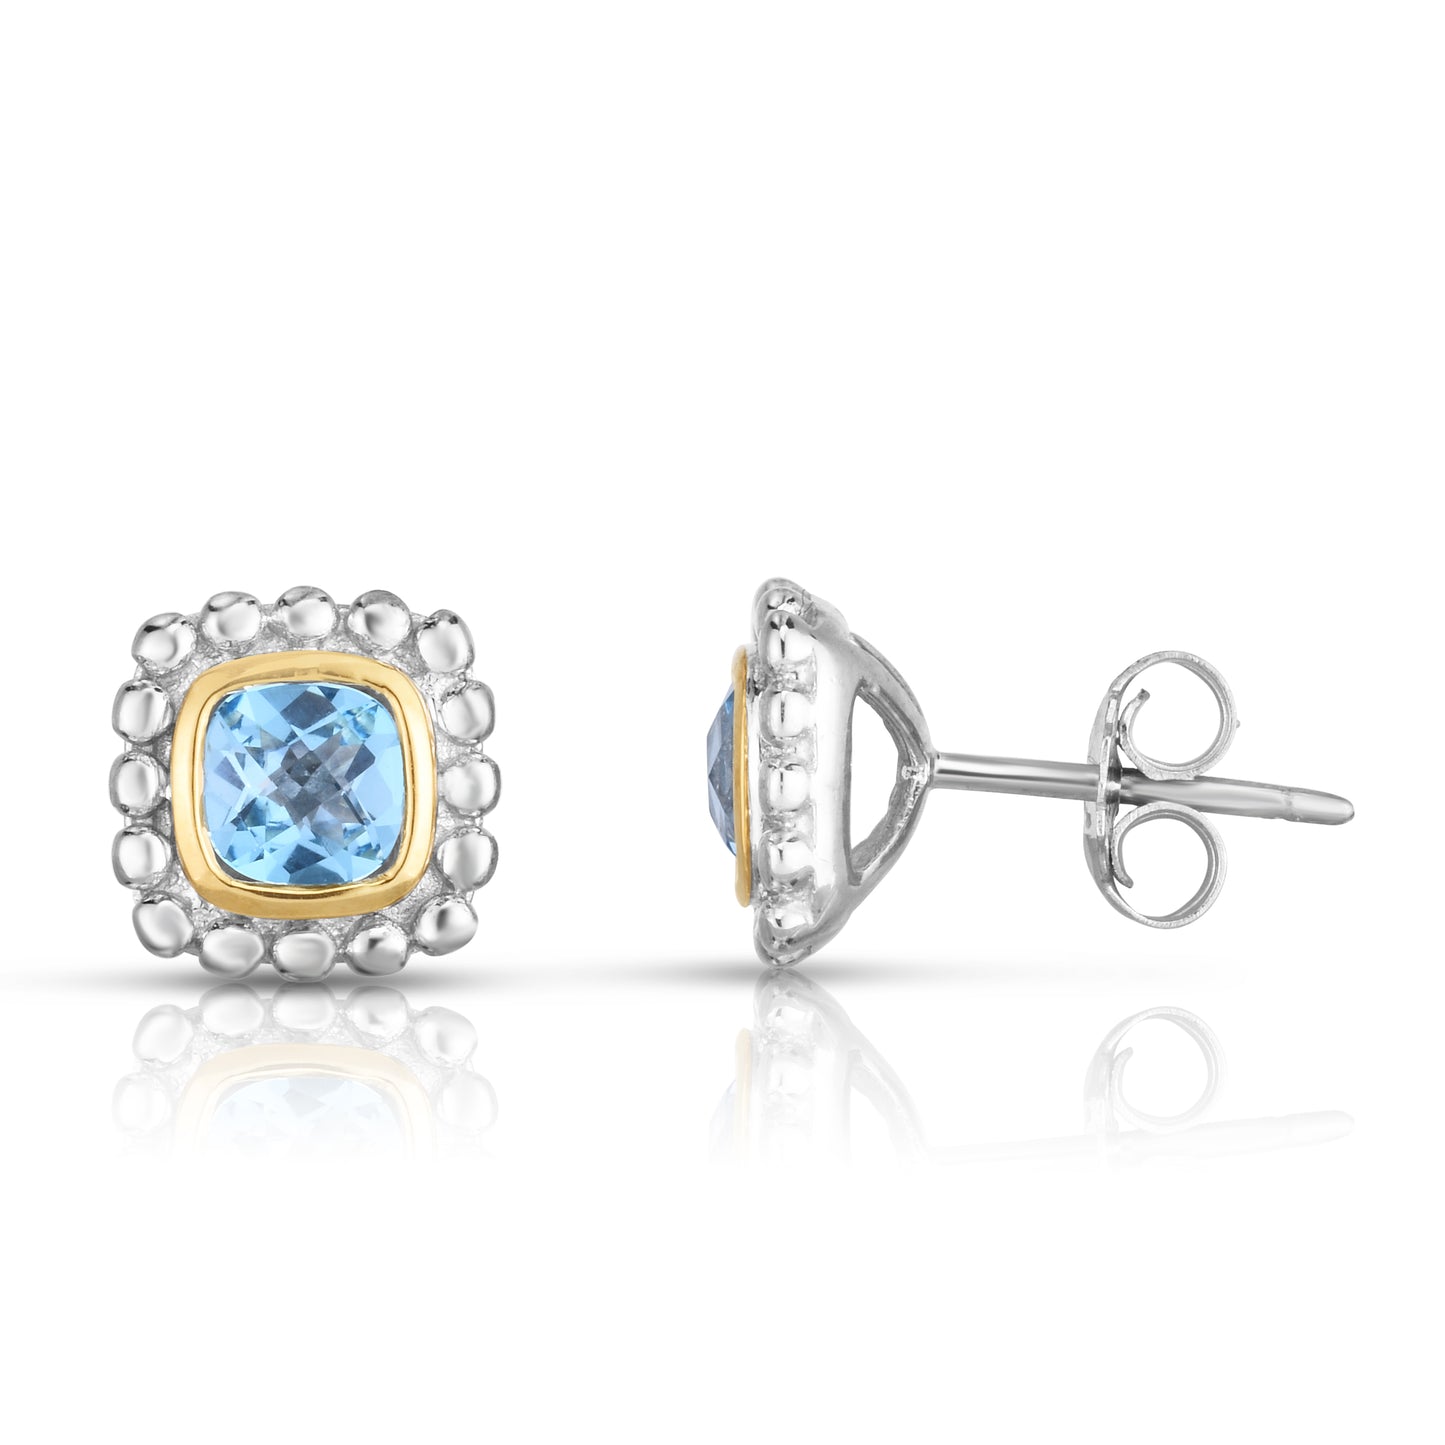 18K Gold & Silver Round Post Popcorn Stud Earrings with Gemstone Options